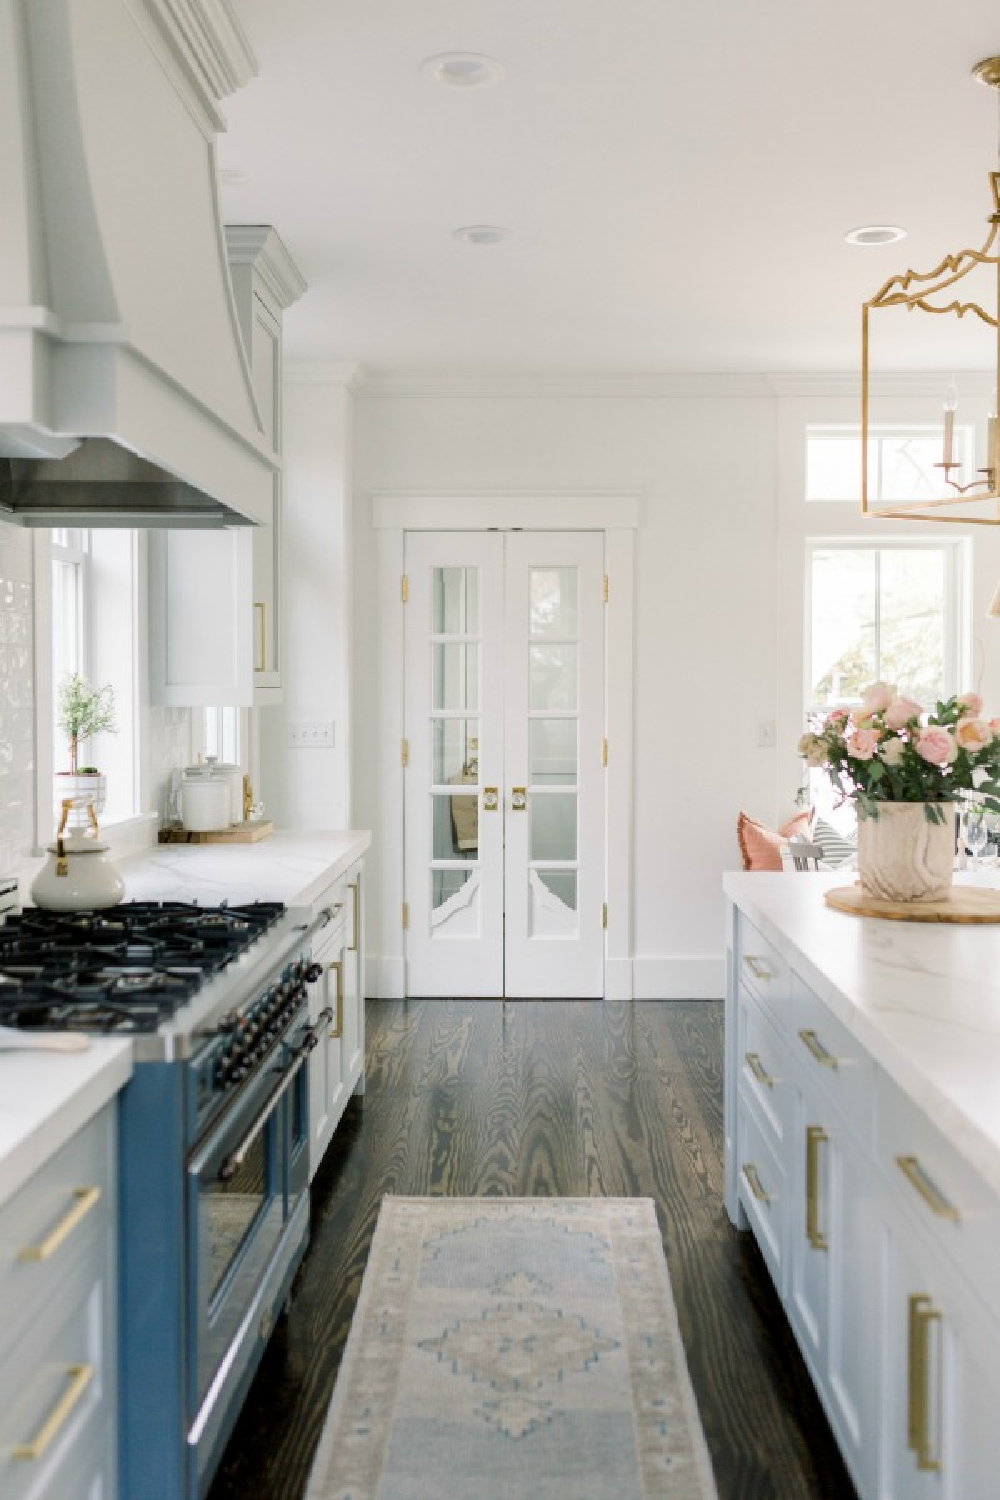 Elegant white farmhouse kitchen with Benjamin Moore Repose Grey cabinets, subway tile, gold accents, and reclaimed barn wood. Design: Finding Lovely. Wall color: Benjamin Moore Chantilly Lace.